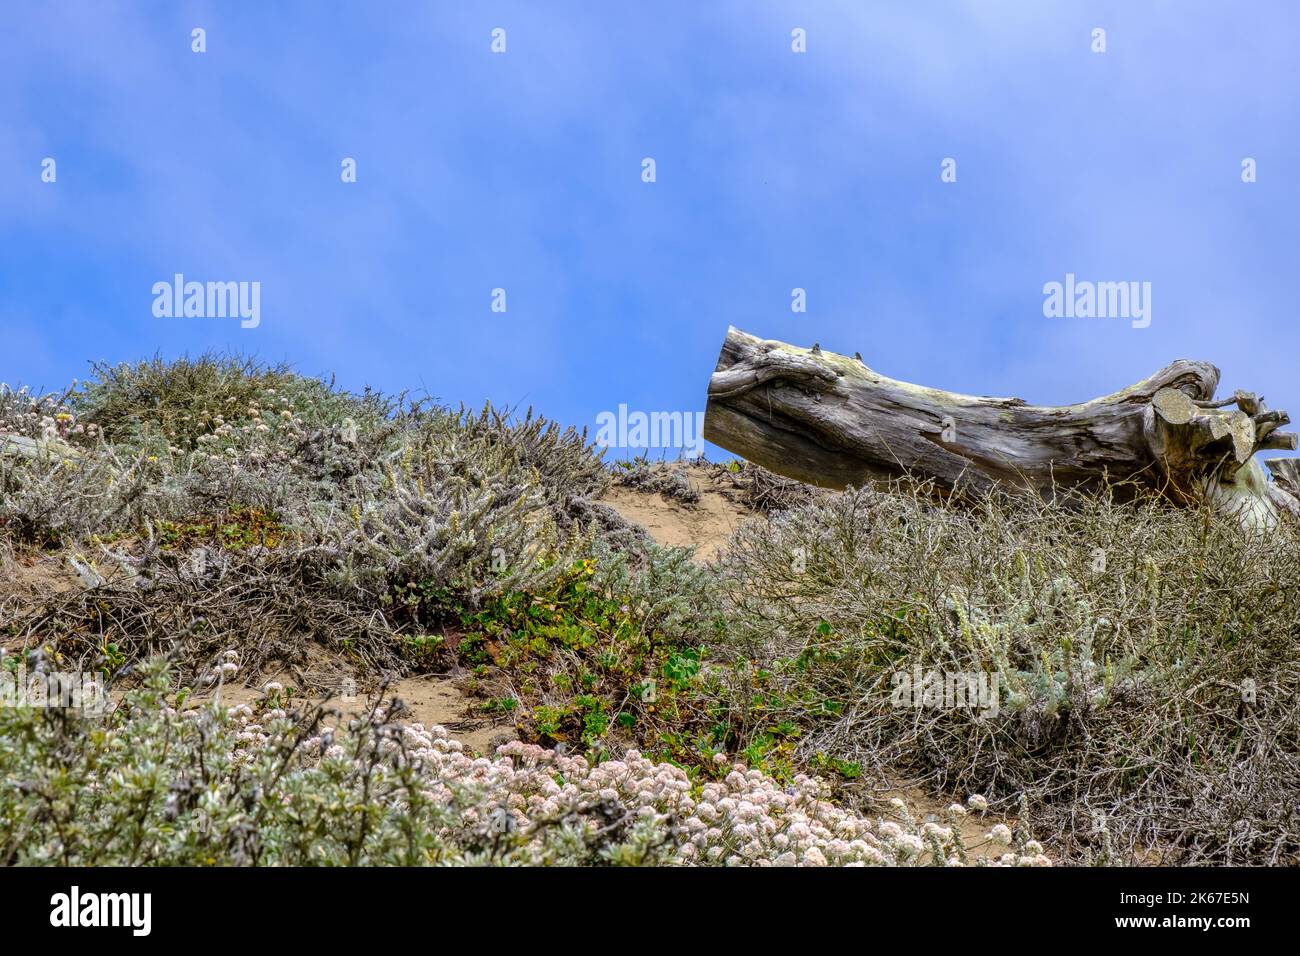 An old log on the sandy bluff at Lands End, San Francisco, California, USA, with various grasses and ground plants. Stock Photo